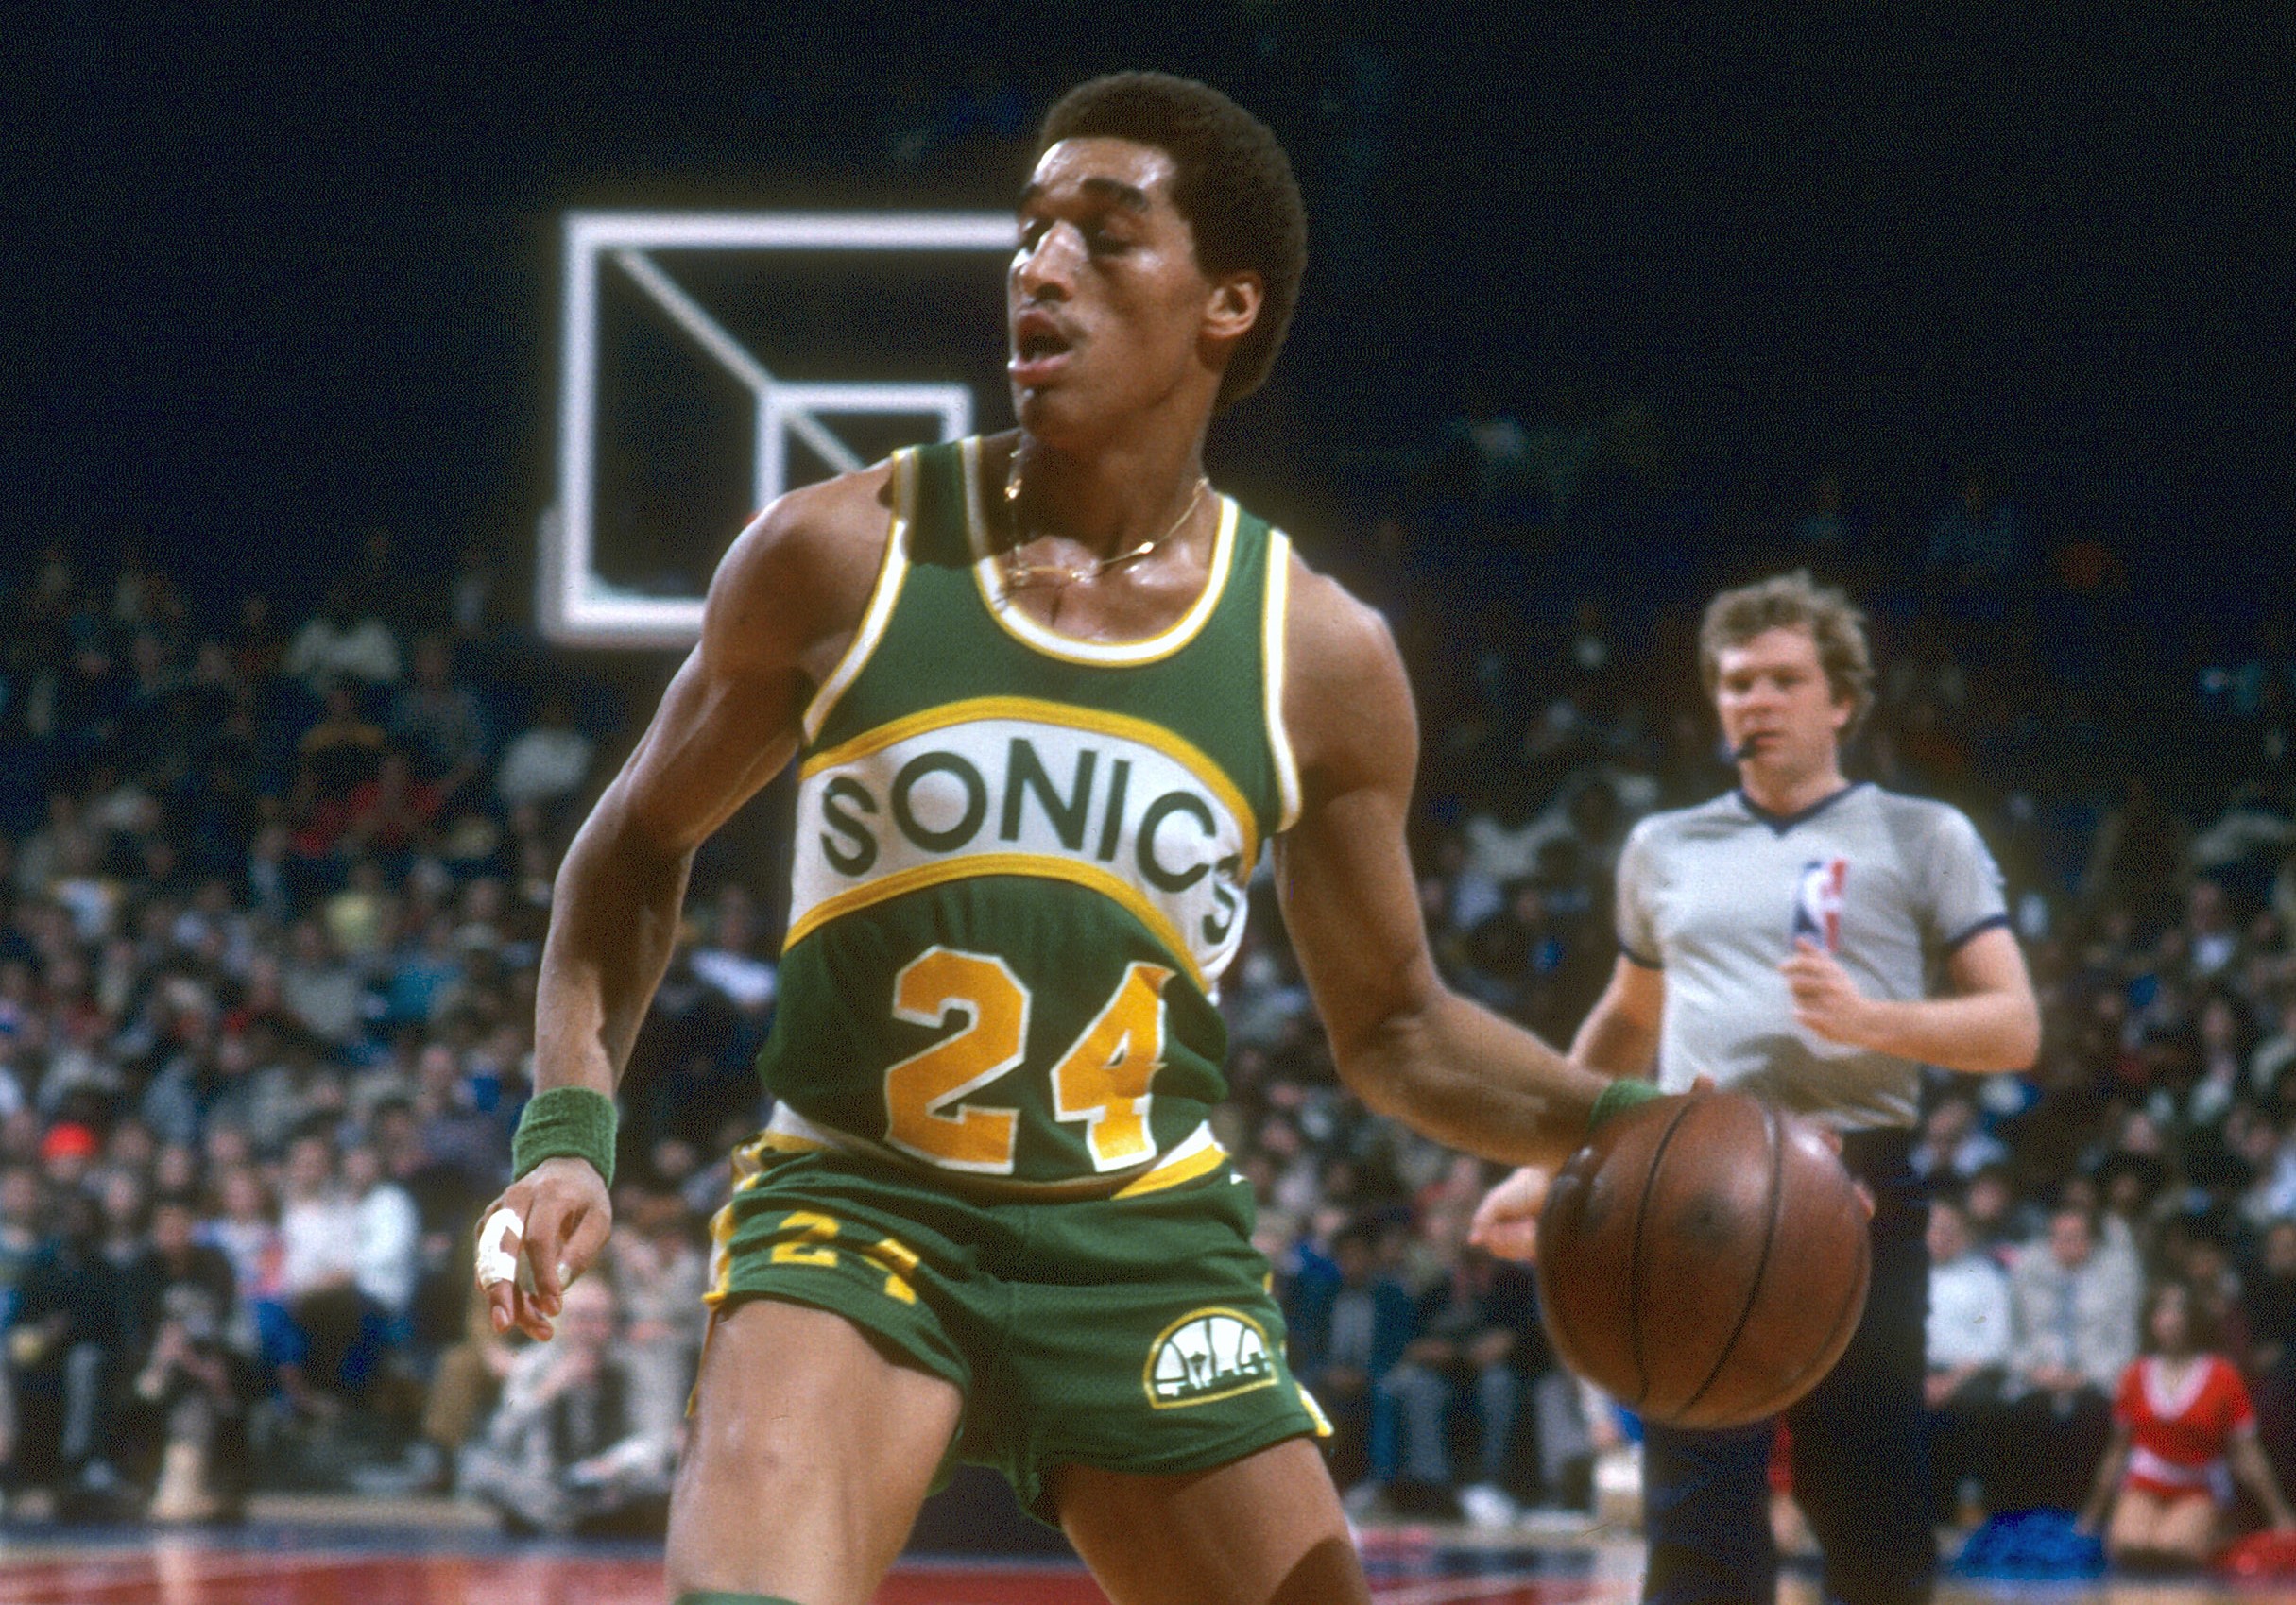 Dennis Johnson of the Seattle Supersonics dribbles the ball against the Washington Bullets.